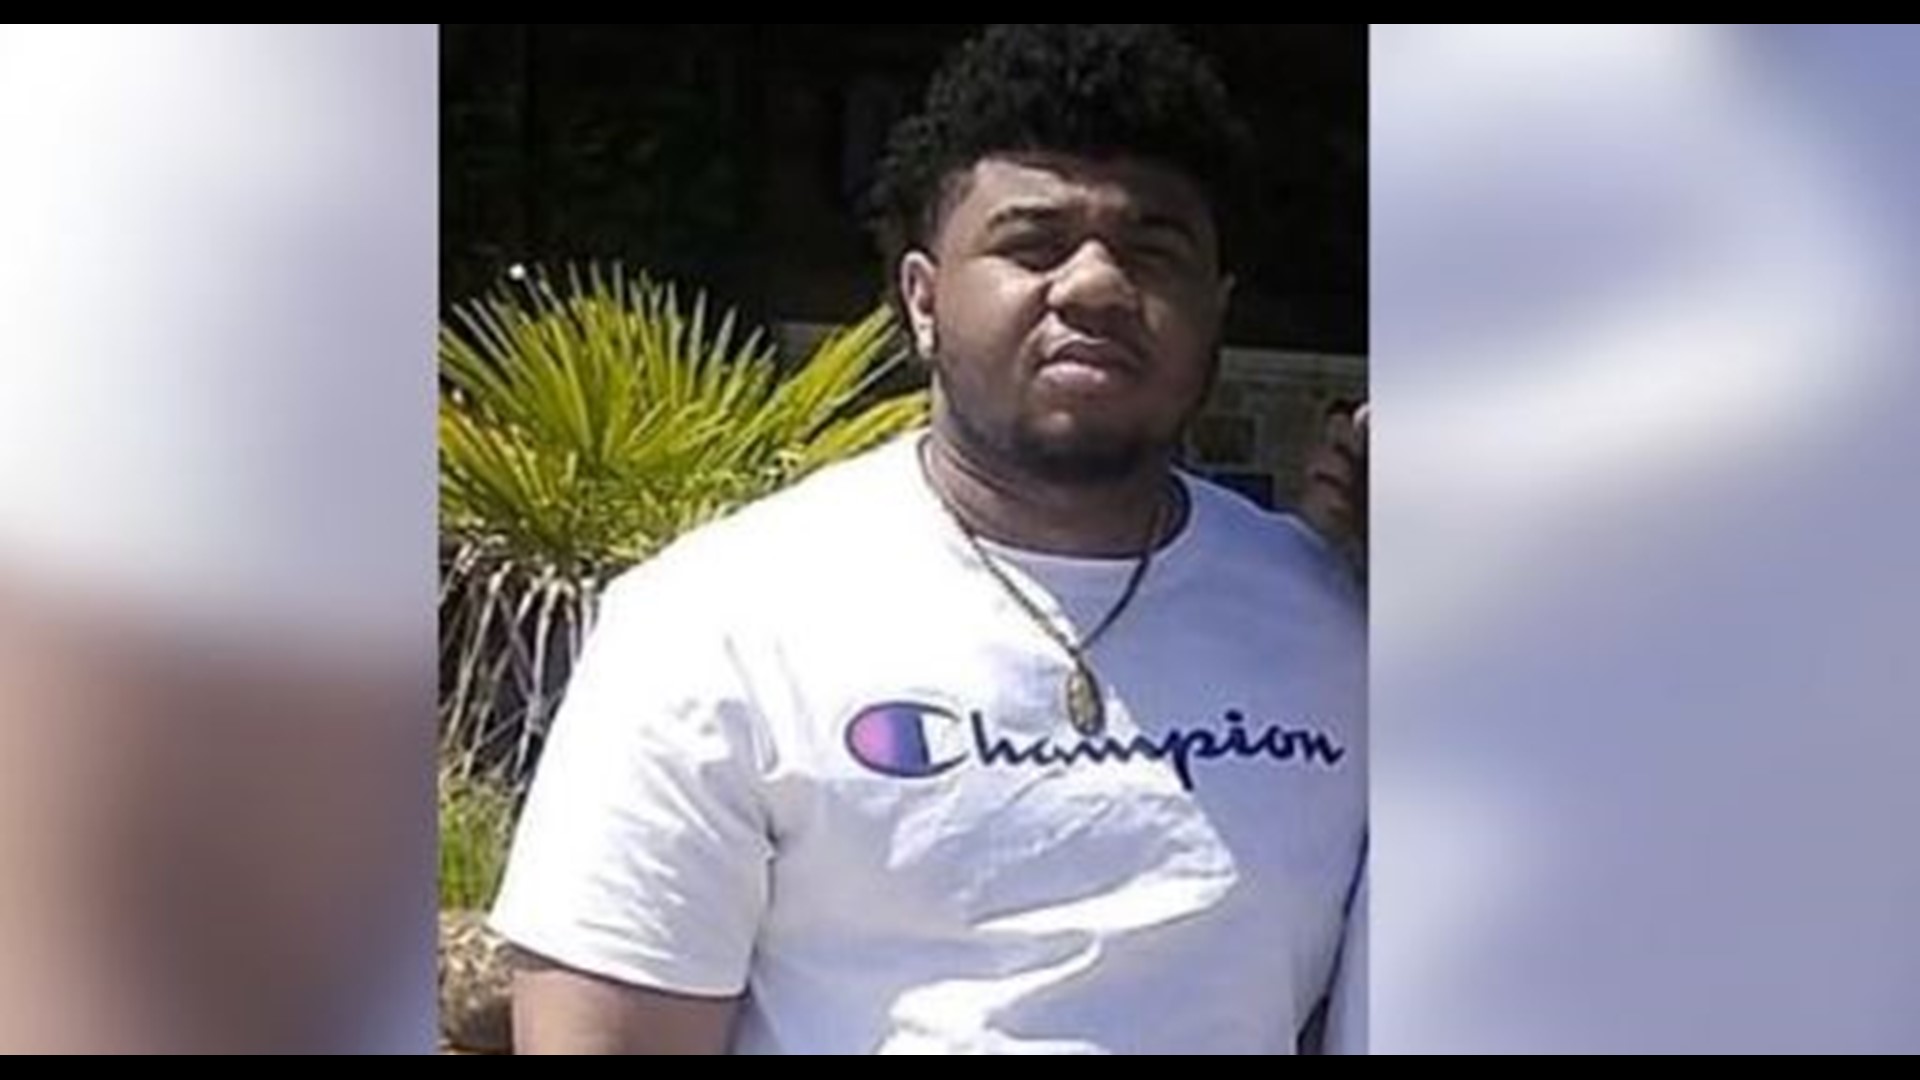 2 Bibb County high school football coaches have been placed on paid leave amid an investigation into the death of a player.